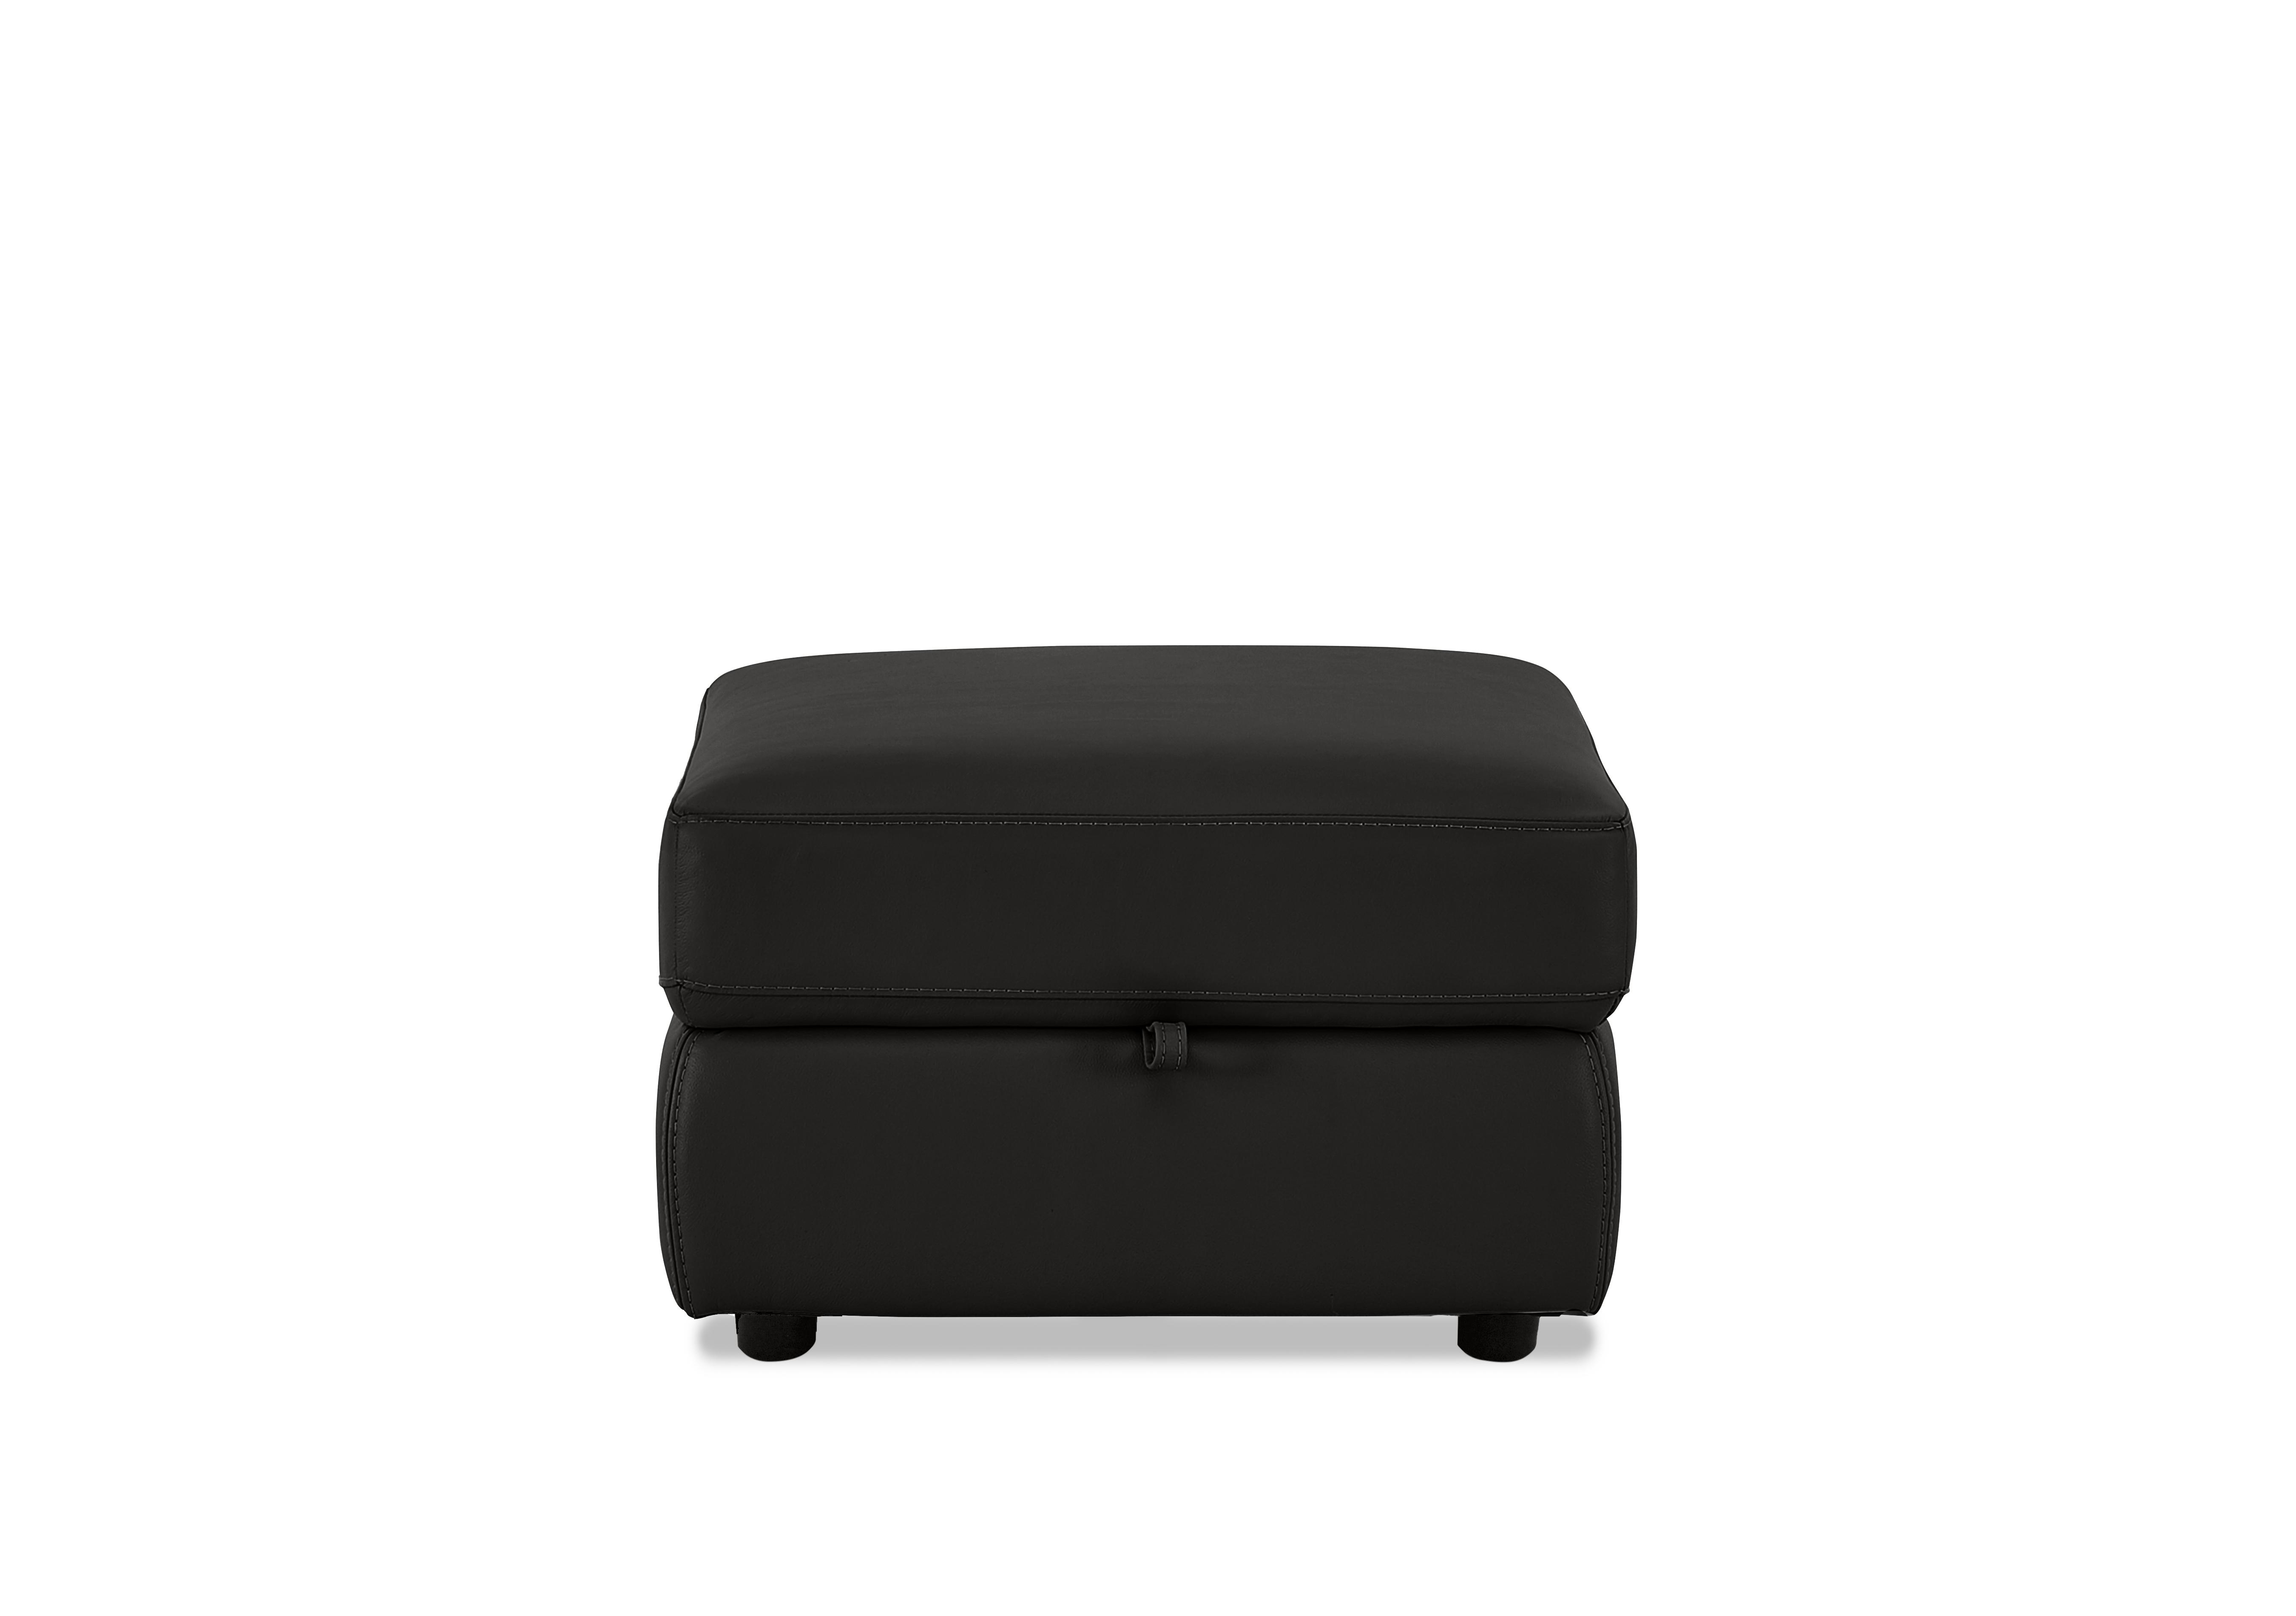 Touch Leather Storage Footstool in Bv-3500 Classic Black on Furniture Village